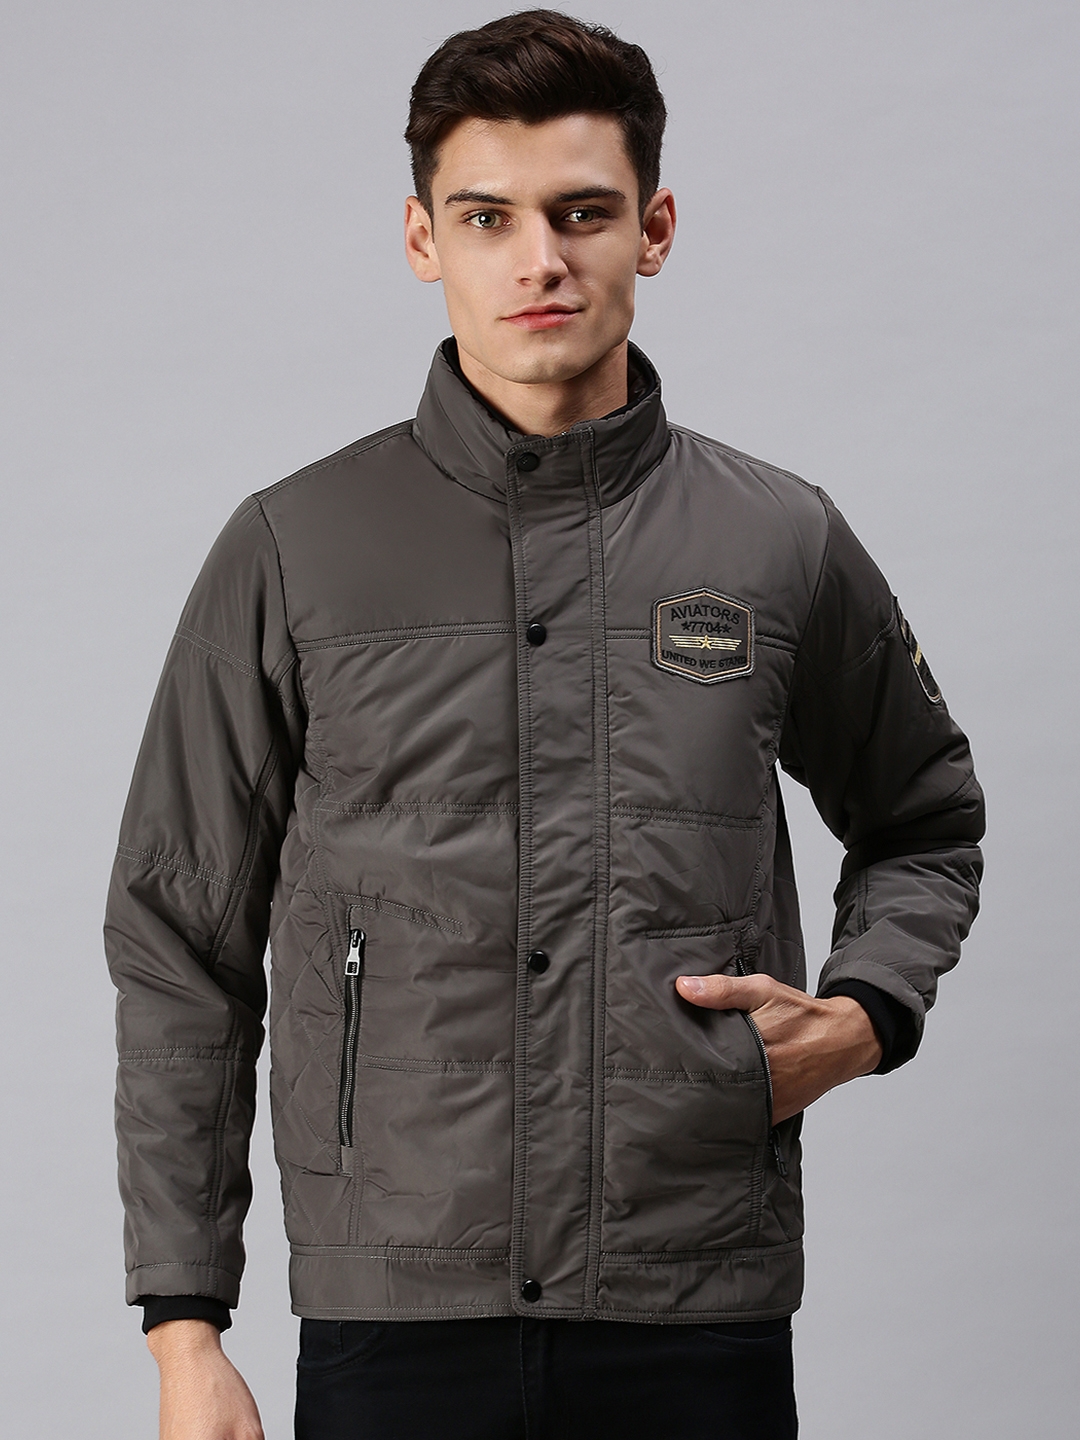 Men's Grey Polyester Solid Bomber Jackets